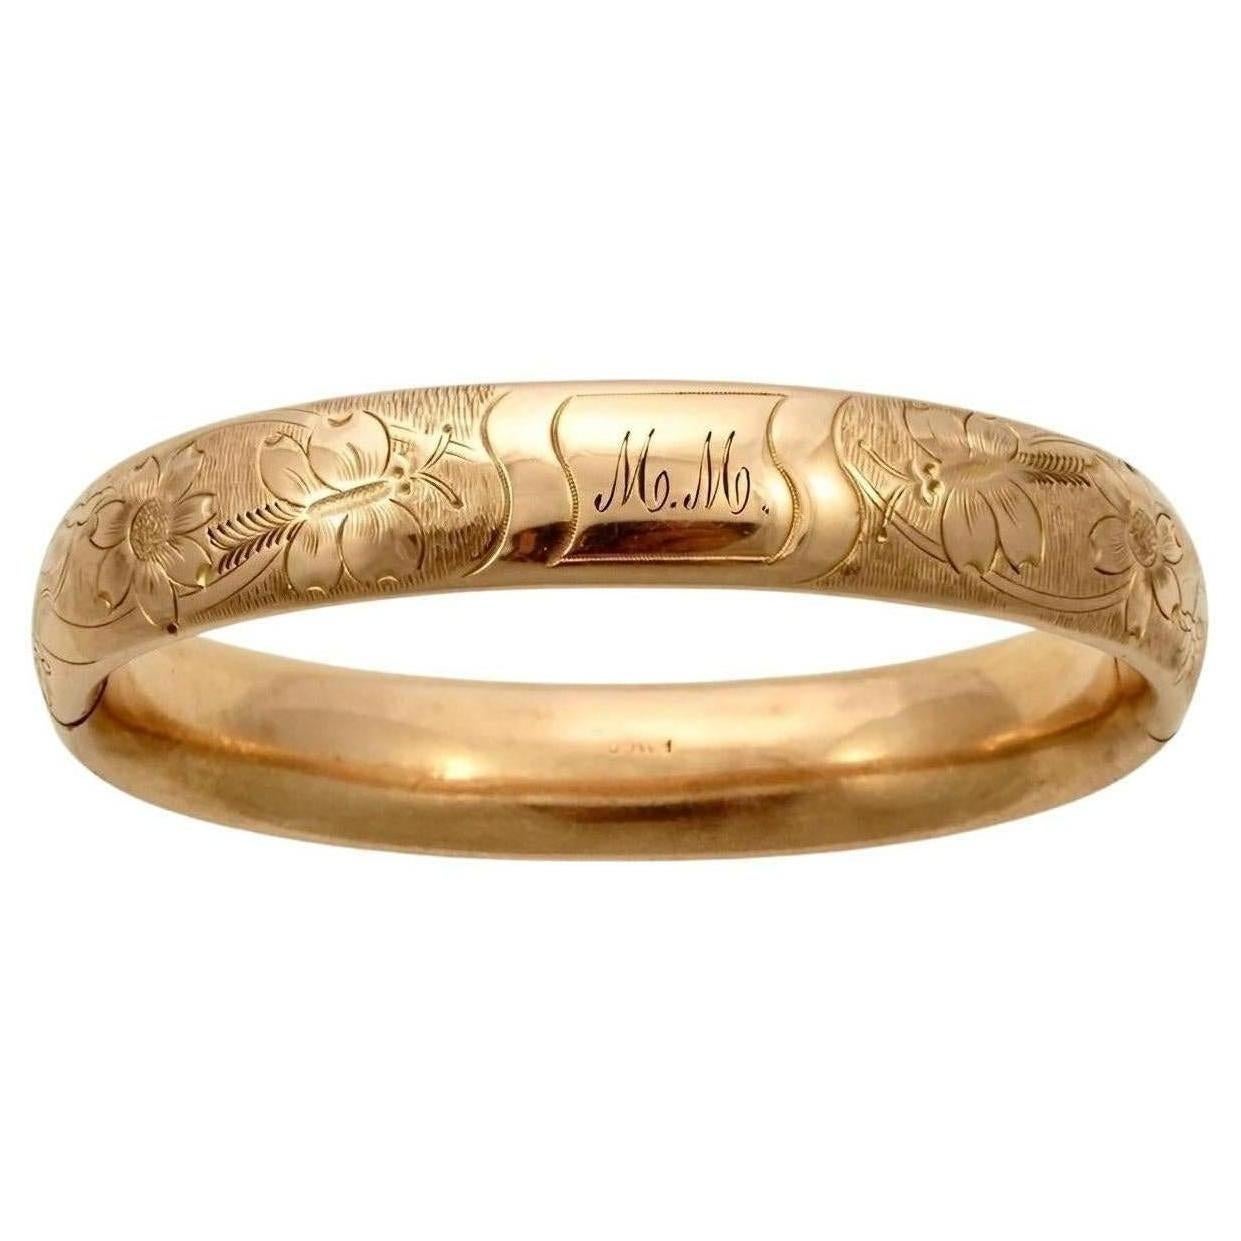 FMCO wonderful antique rose gold filled engraved bangle bracelet, featuring flowers and butterflies. FMCO stands for Finberg Manufacturing Company.  It opens with a push button. The bangle is slightly oval, the inside measurements are 6.2 cm / 2.4